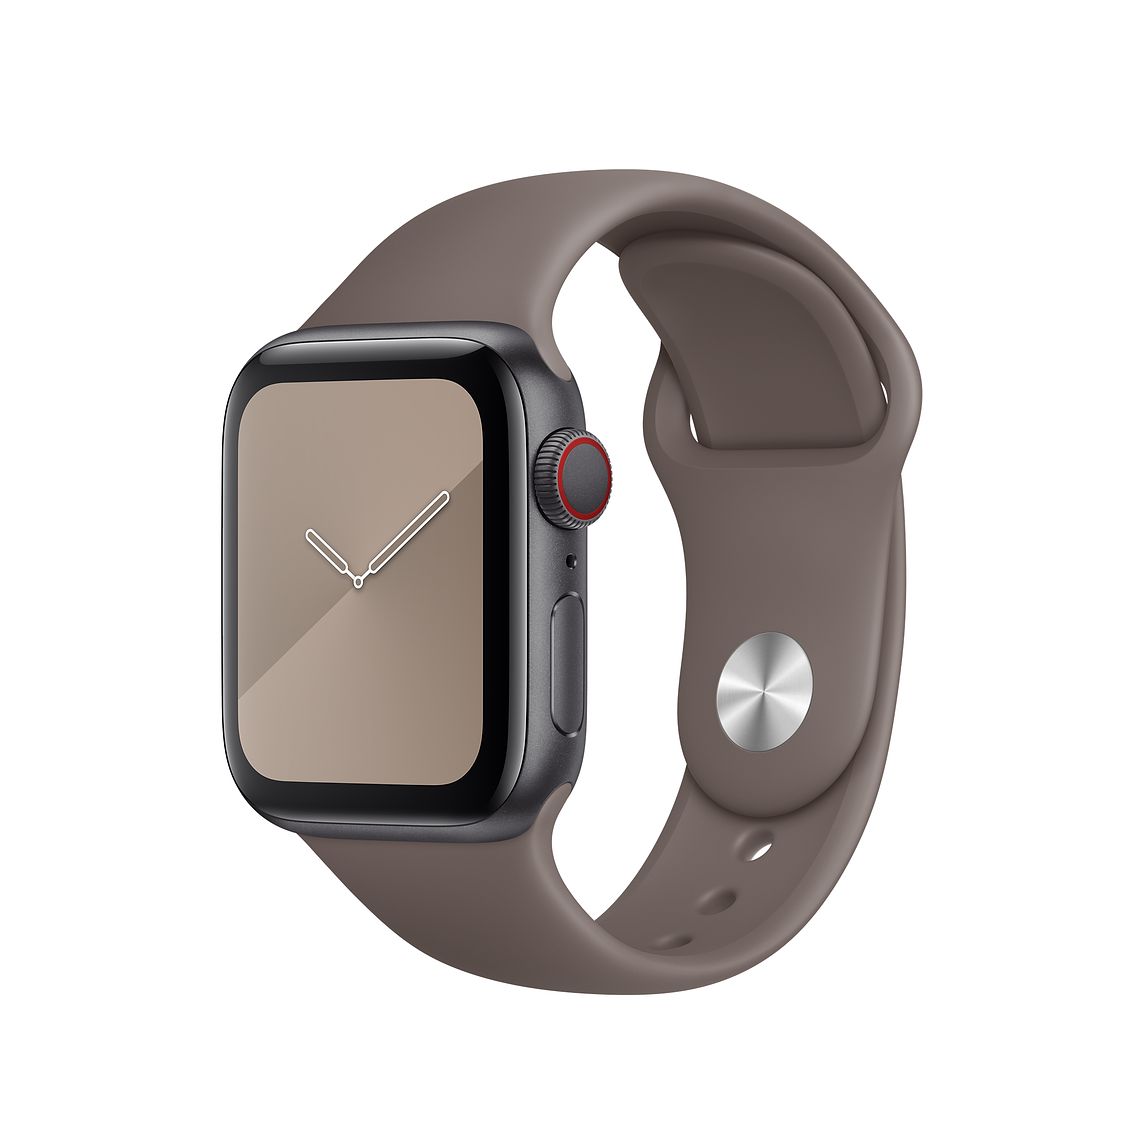 Apple Releases New Apple Watch Sport Bands and Silicone iPhone Cases